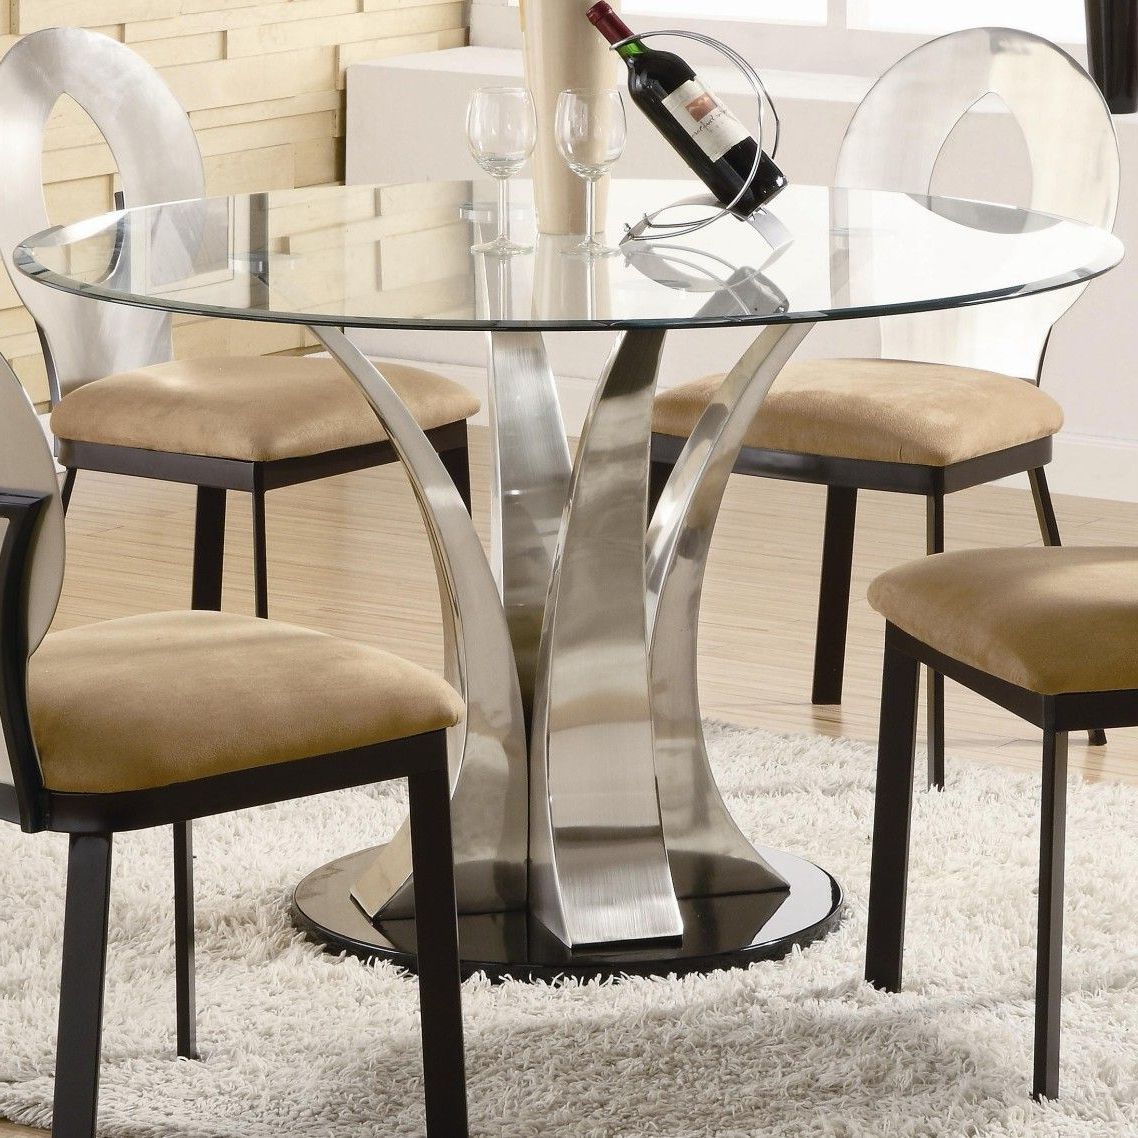 Awesome Modern Glass Top Dining Table With Chrome Metal Regarding Latest Eames Style Dining Tables With Chromed Leg And Tempered Glass Top (Photo 15 of 25)